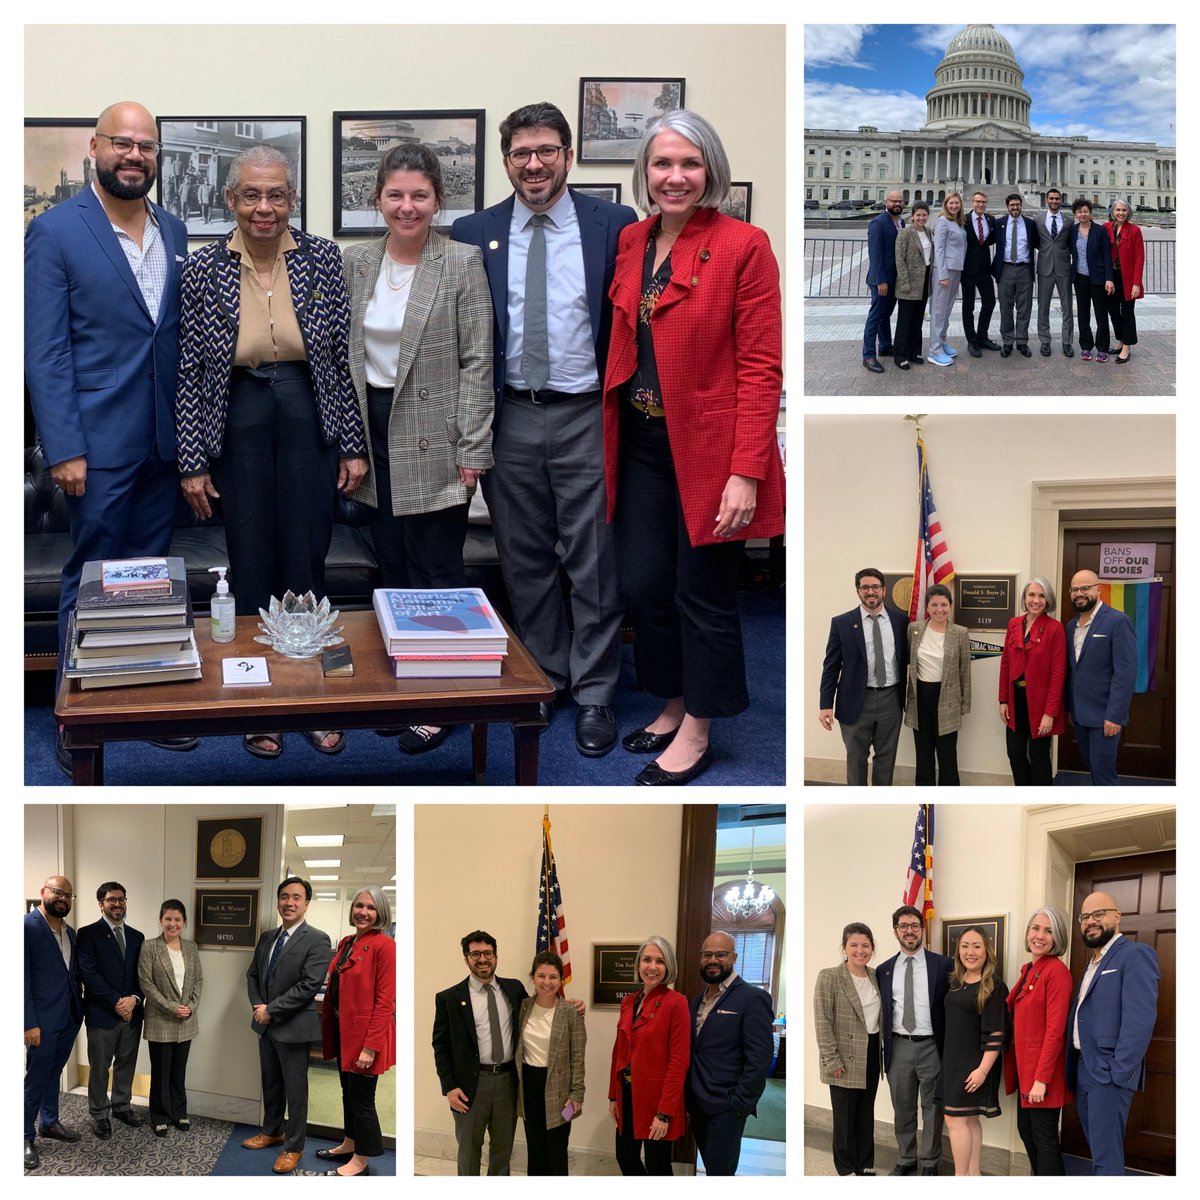 A great day with @ASH_hematology advocating for medical research. Thanks to congresswoman @EleanorNorton and her VA/NC colleagues for their support to #NIH funding,  the #CDC sickle cell disease data program and comprehensive care act. #conquerSCD #Fight4Hematology